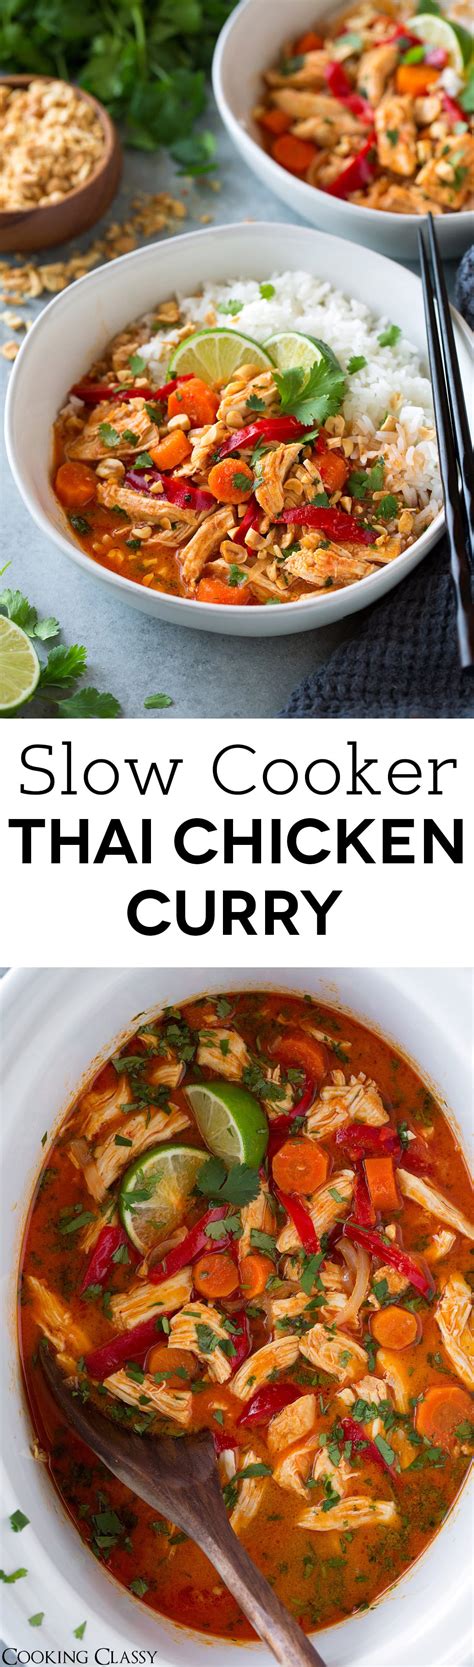 thai-chicken-curry-slow-cooker-or-instant-pot-method image